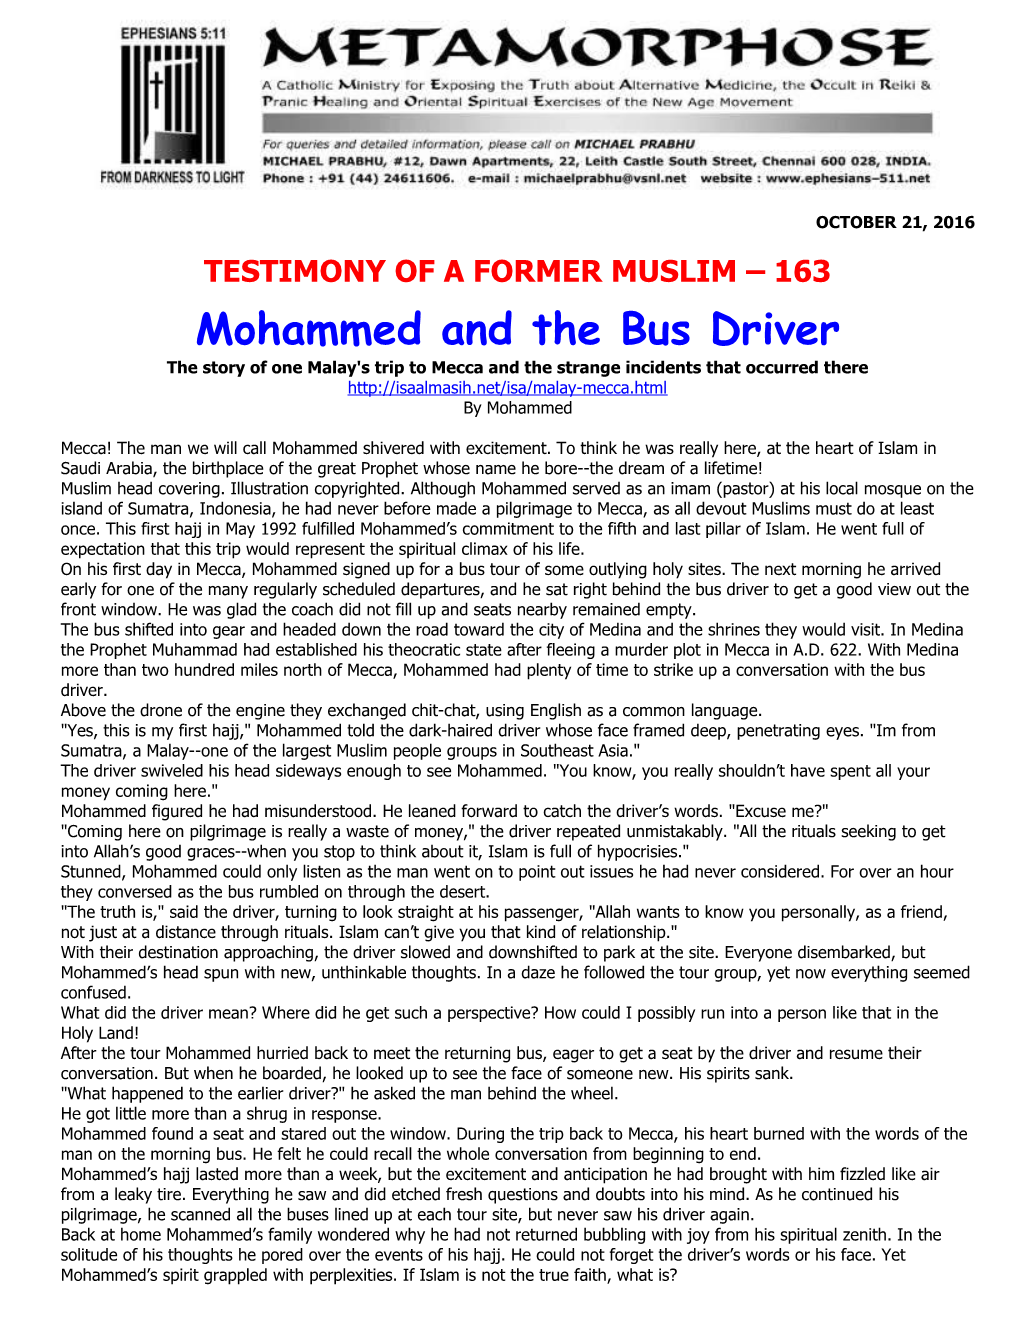 Mohammed and the Bus Driver